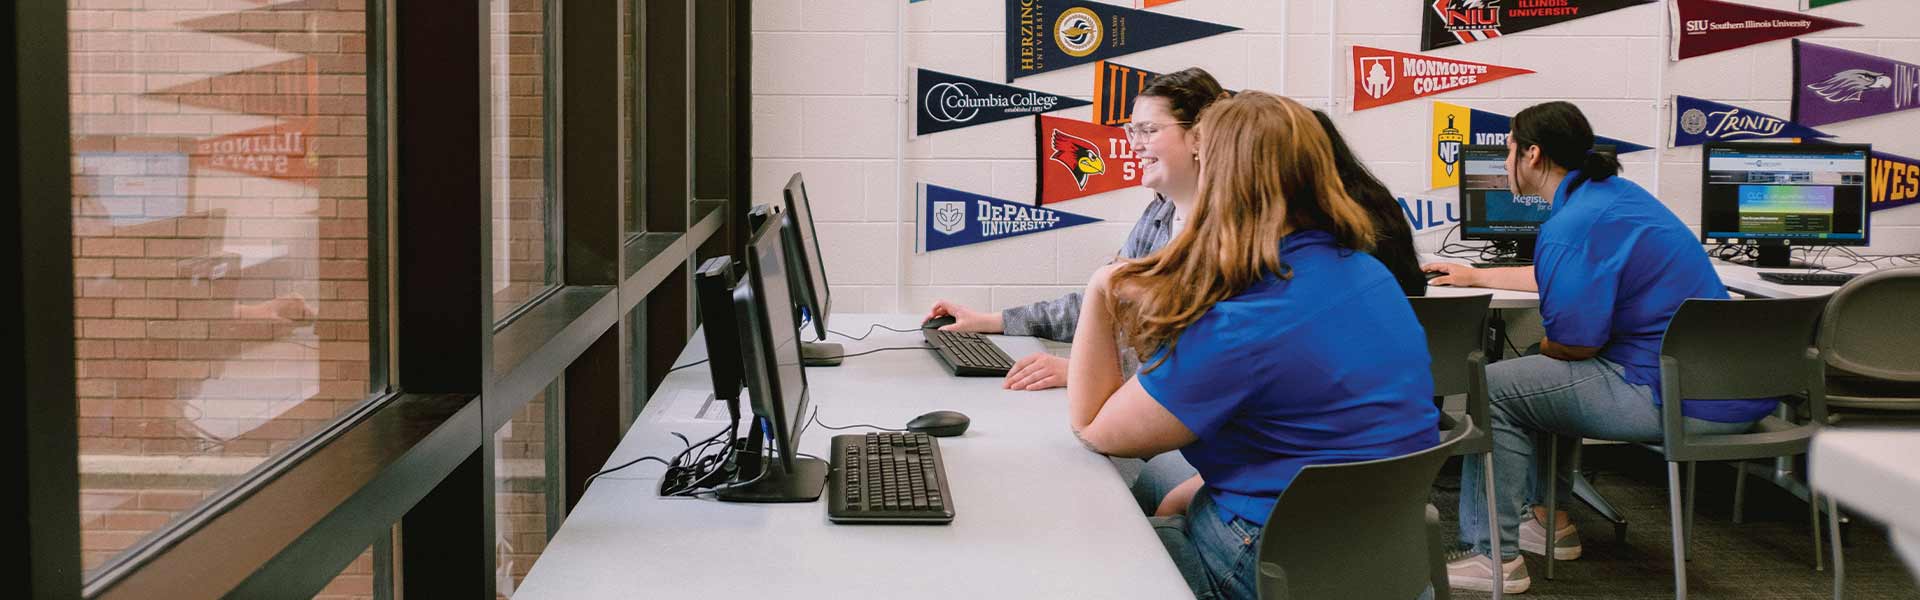 A student and an advisor sit in front of a computer in an office